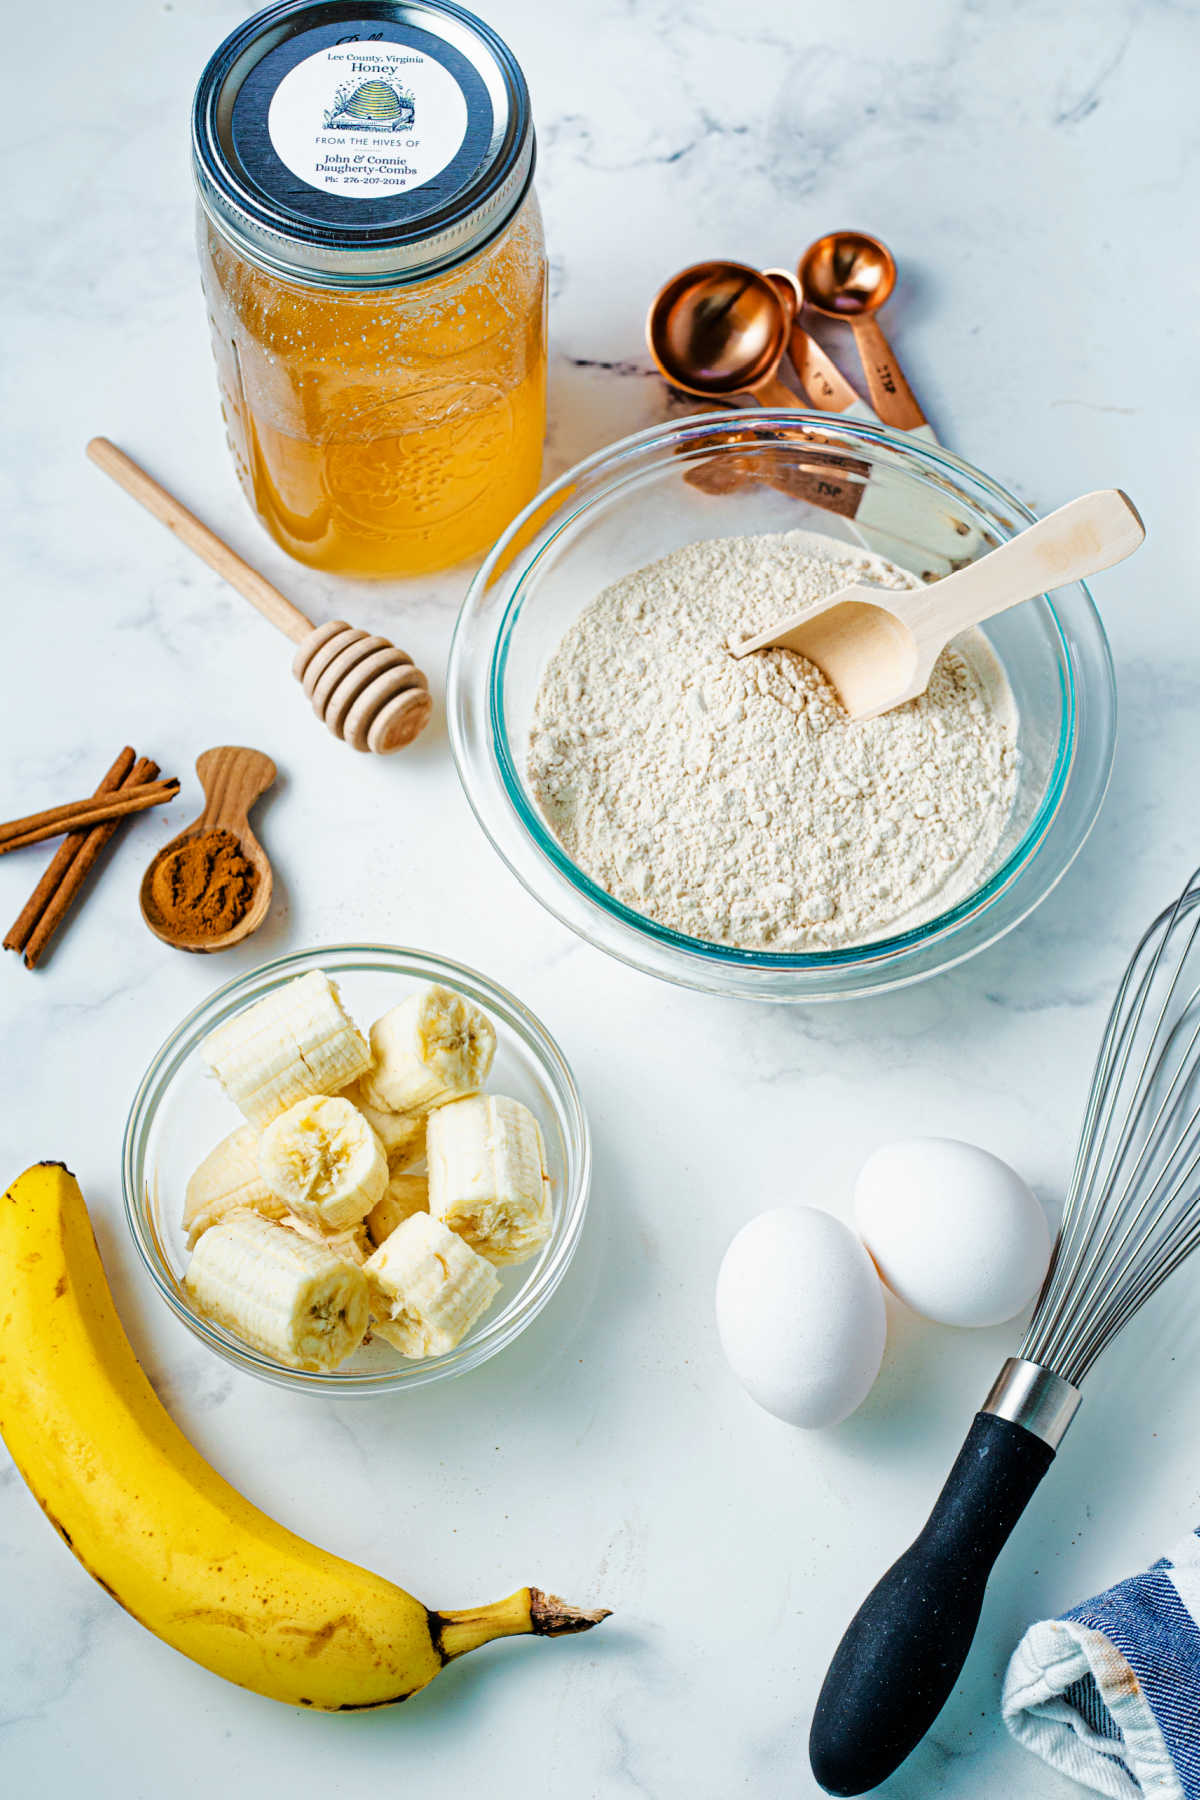 ingredients for whole wheat banana bread on a table, including bananas, honey, eggs, and whole wheat flour.